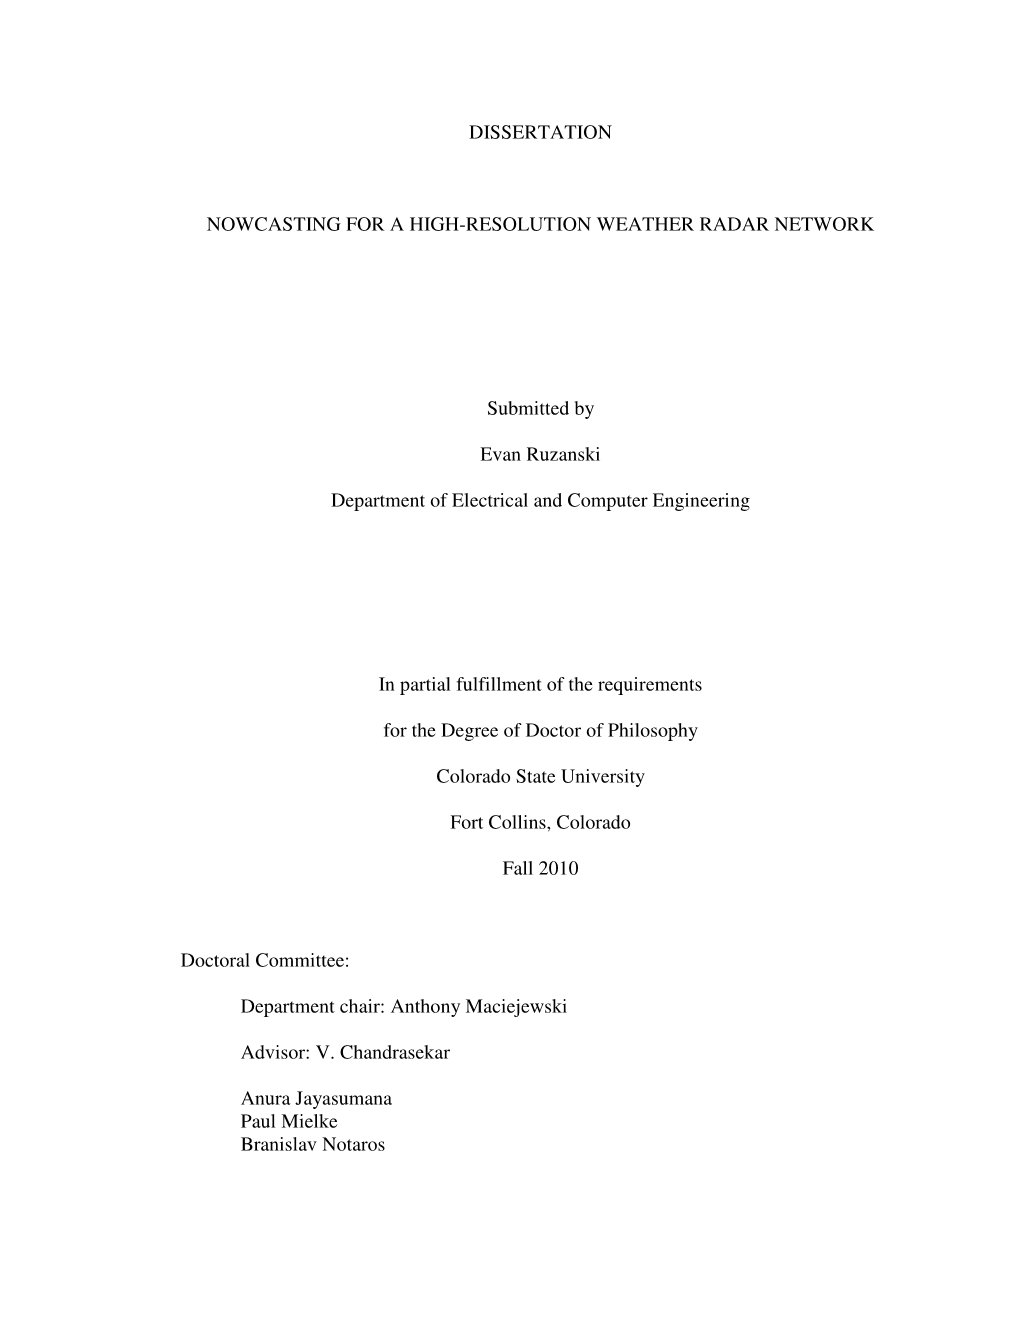 DISSERTATION NOWCASTING for a HIGH-RESOLUTION WEATHER RADAR NETWORK Submitted by Evan Ruzanski Department of Electrical and Comp